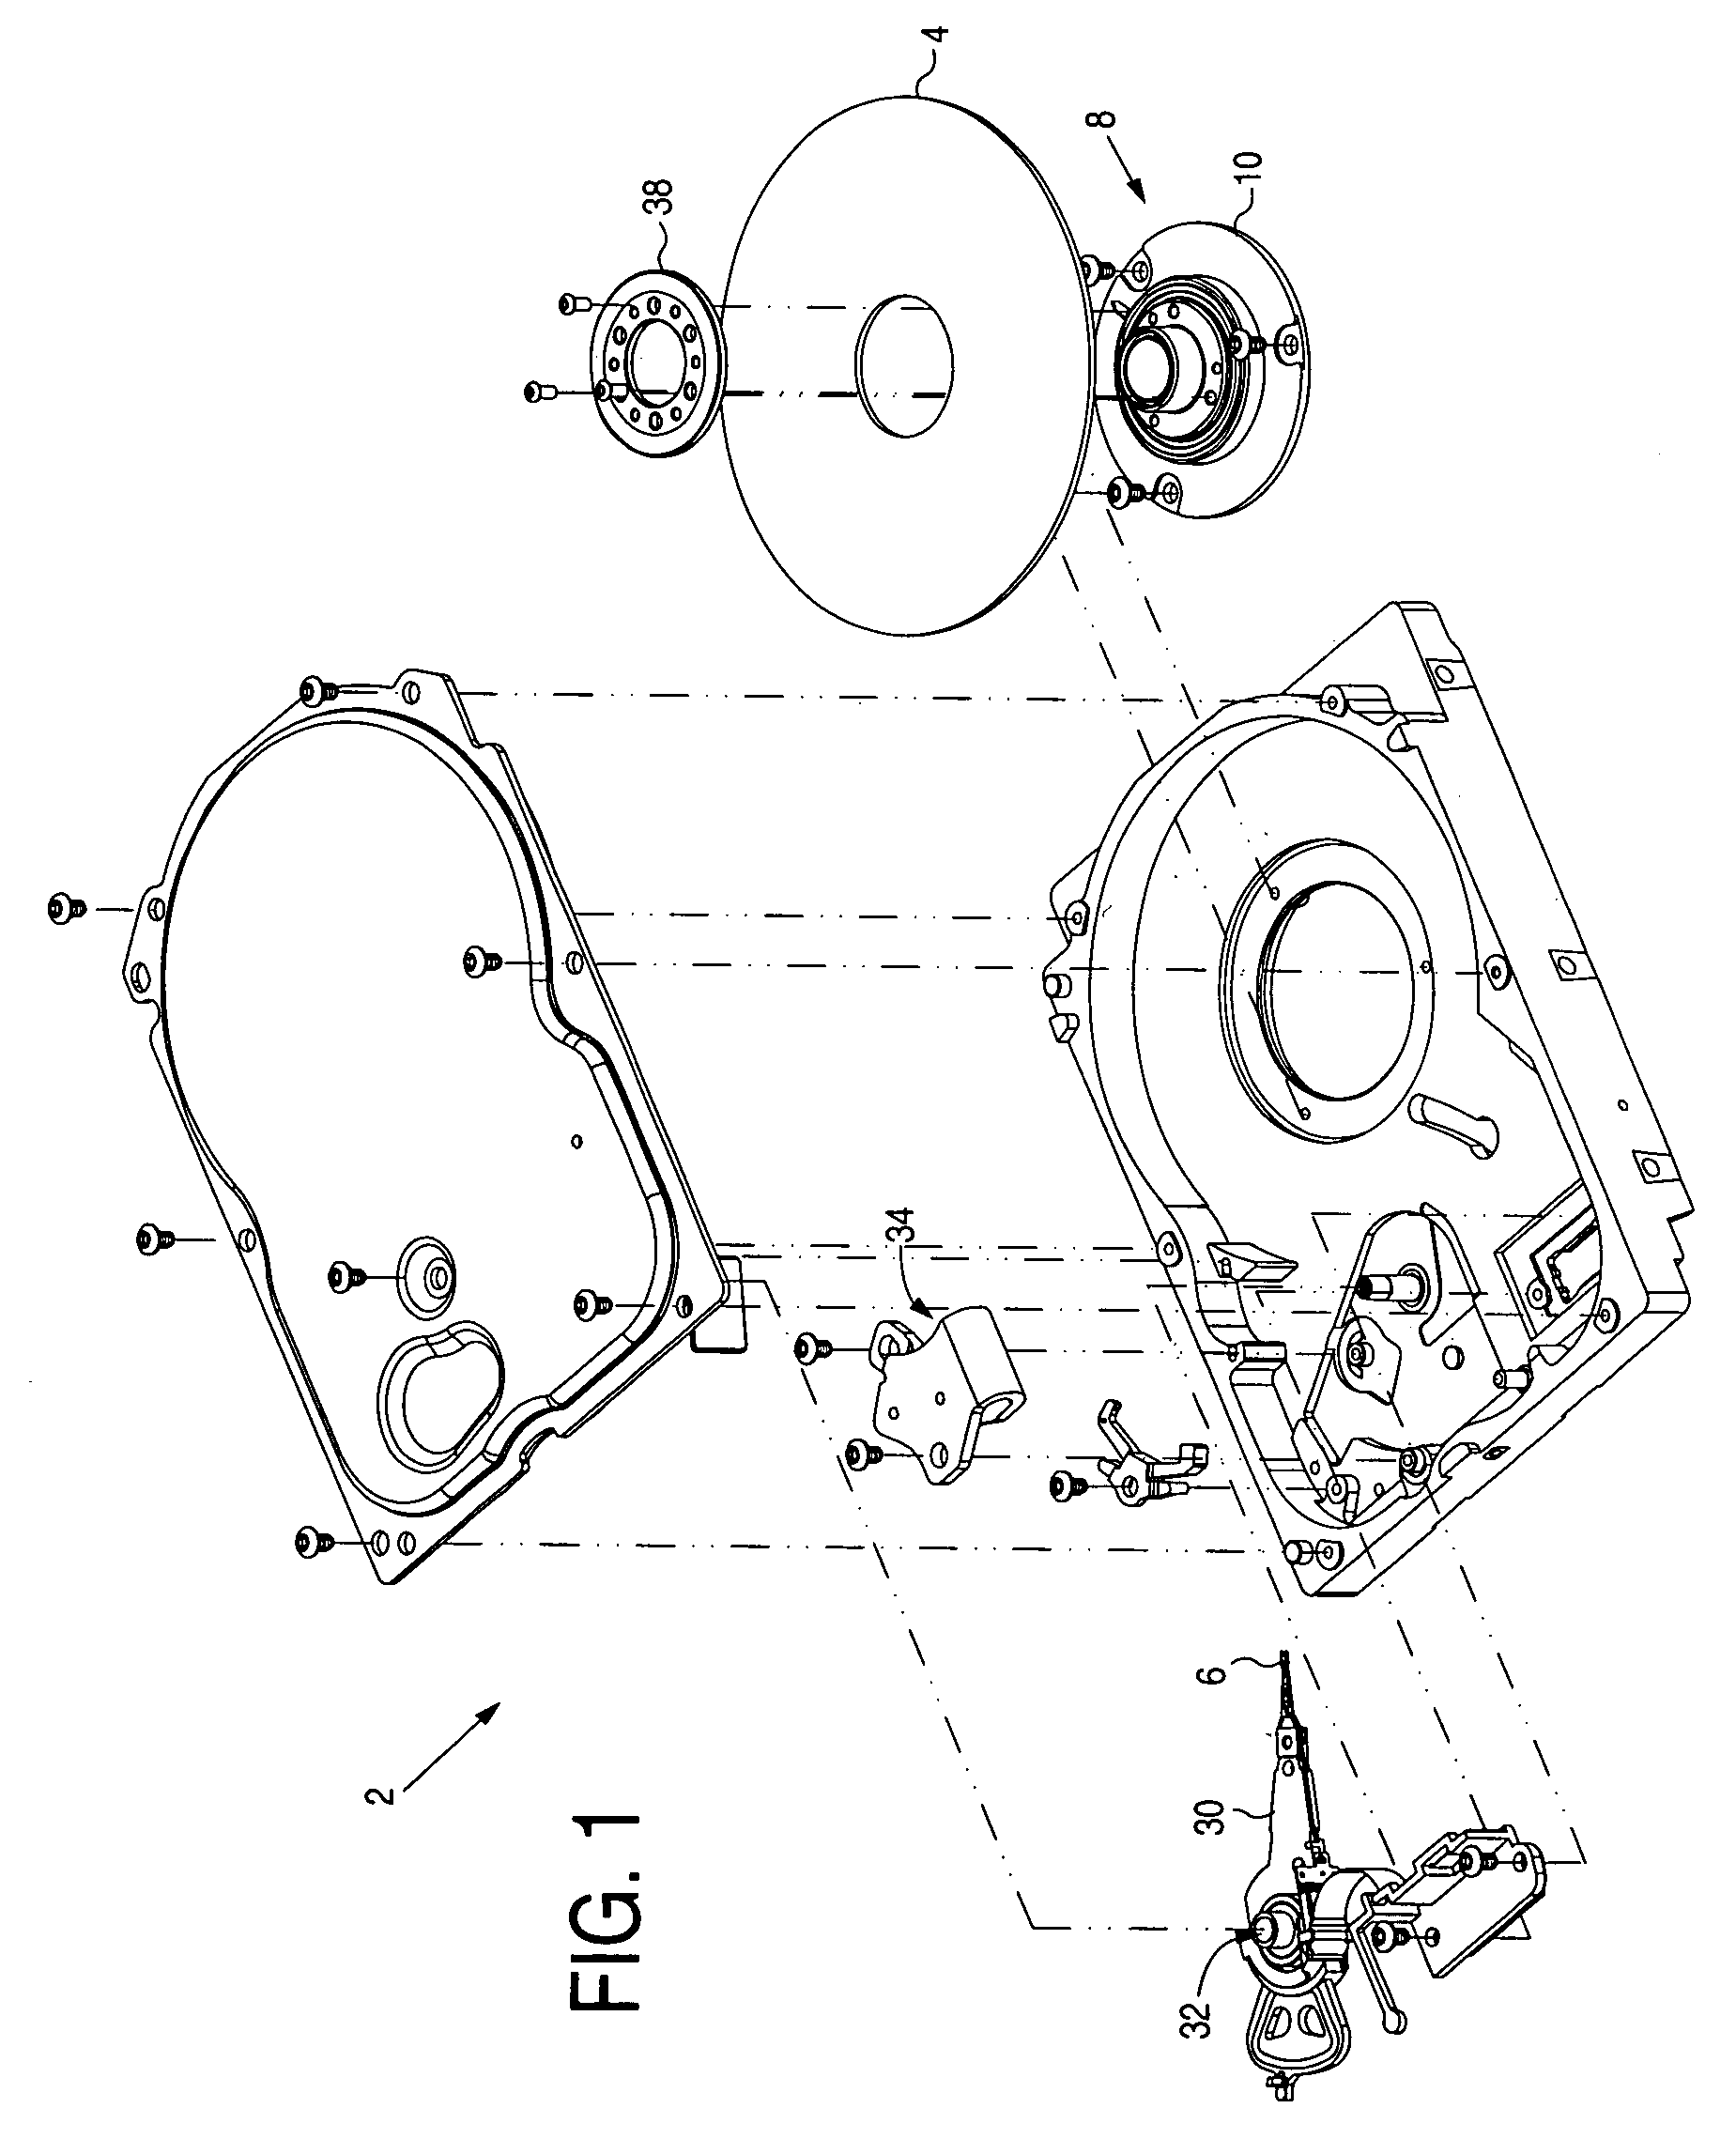 Disk drive comprising a spindle motor having a windings shield for reduced disk voltage coupling